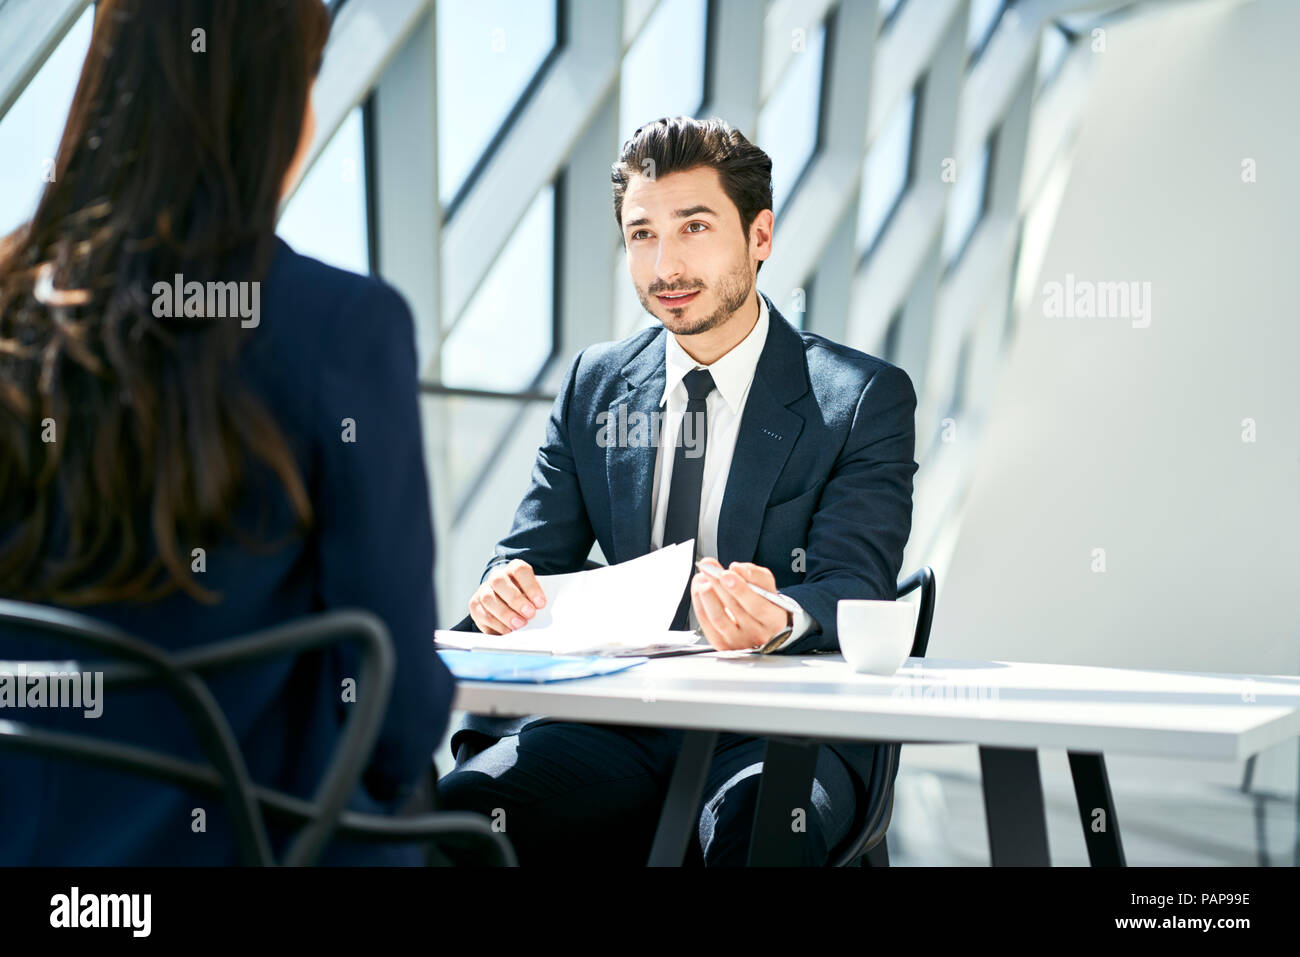 Businessman looking at businesswoman in modern office Banque D'Images